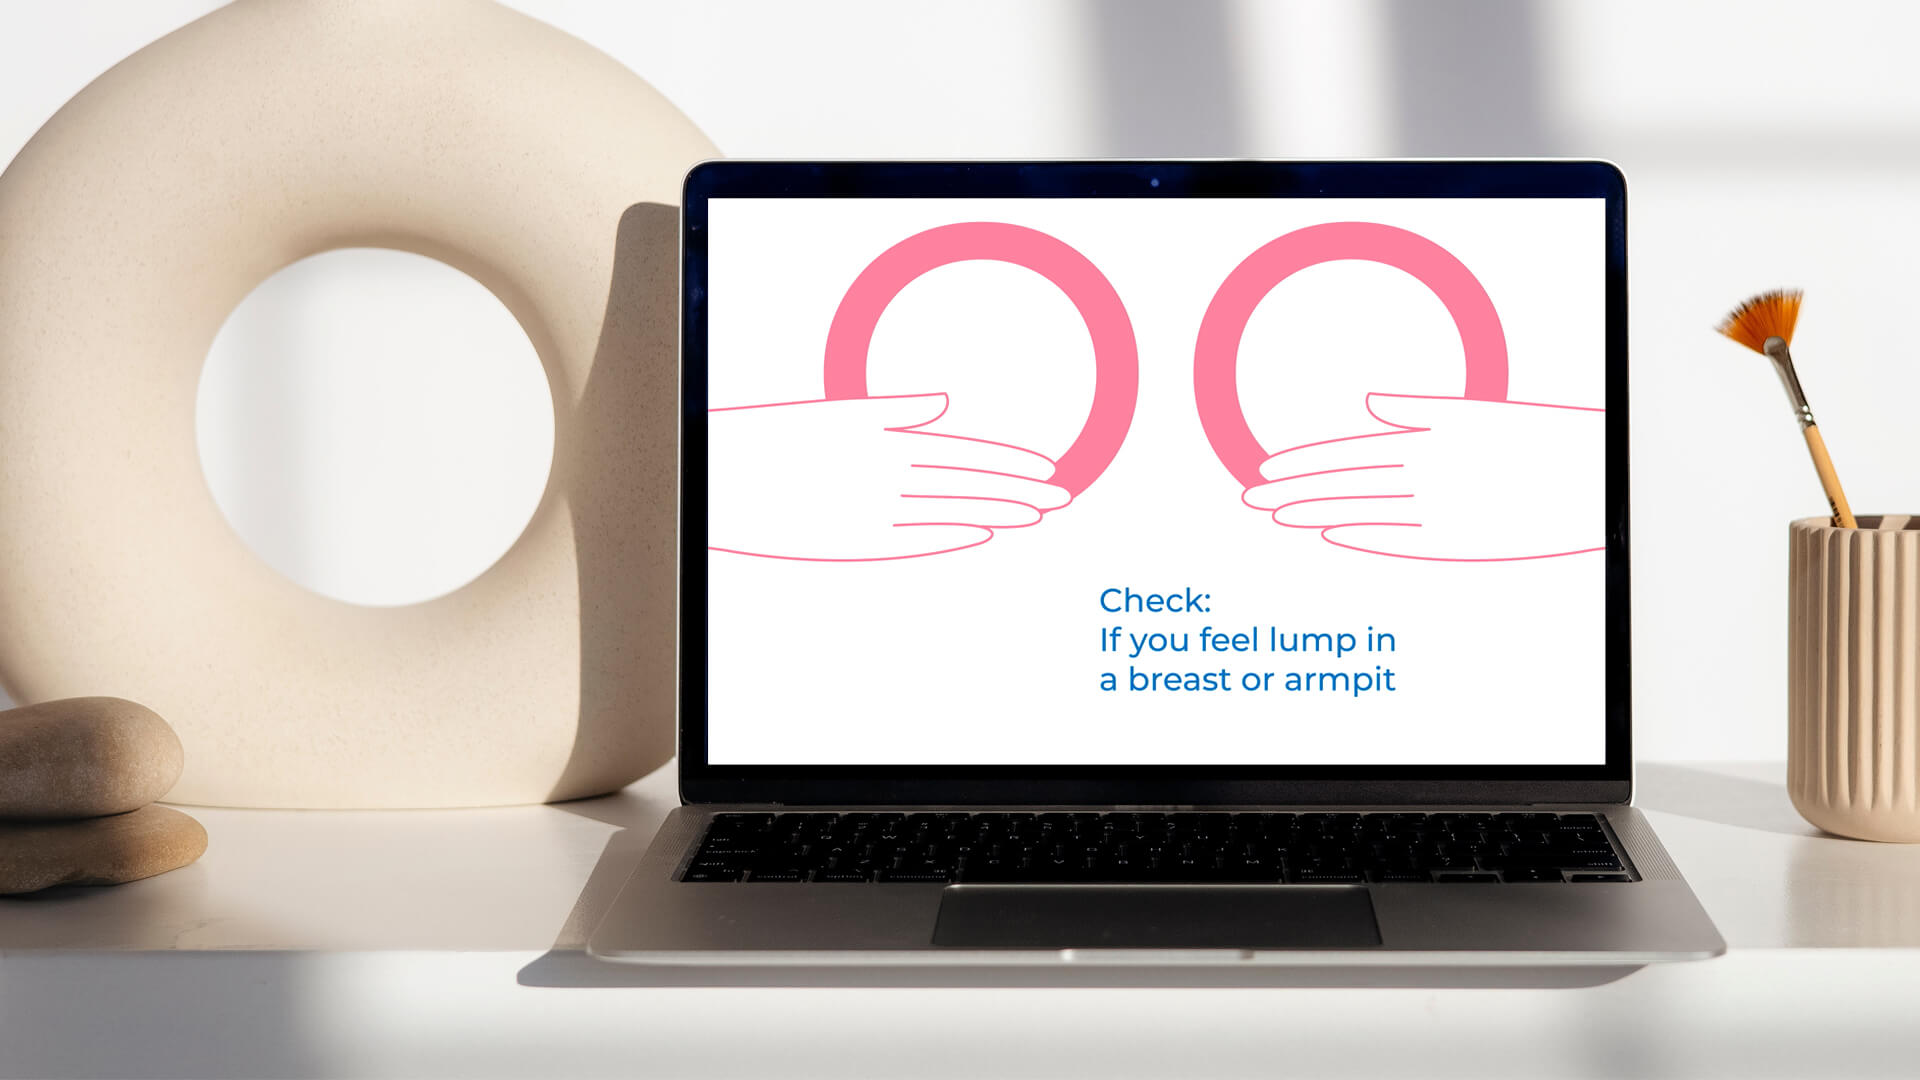 Roche Breast Cancer Awareness Video